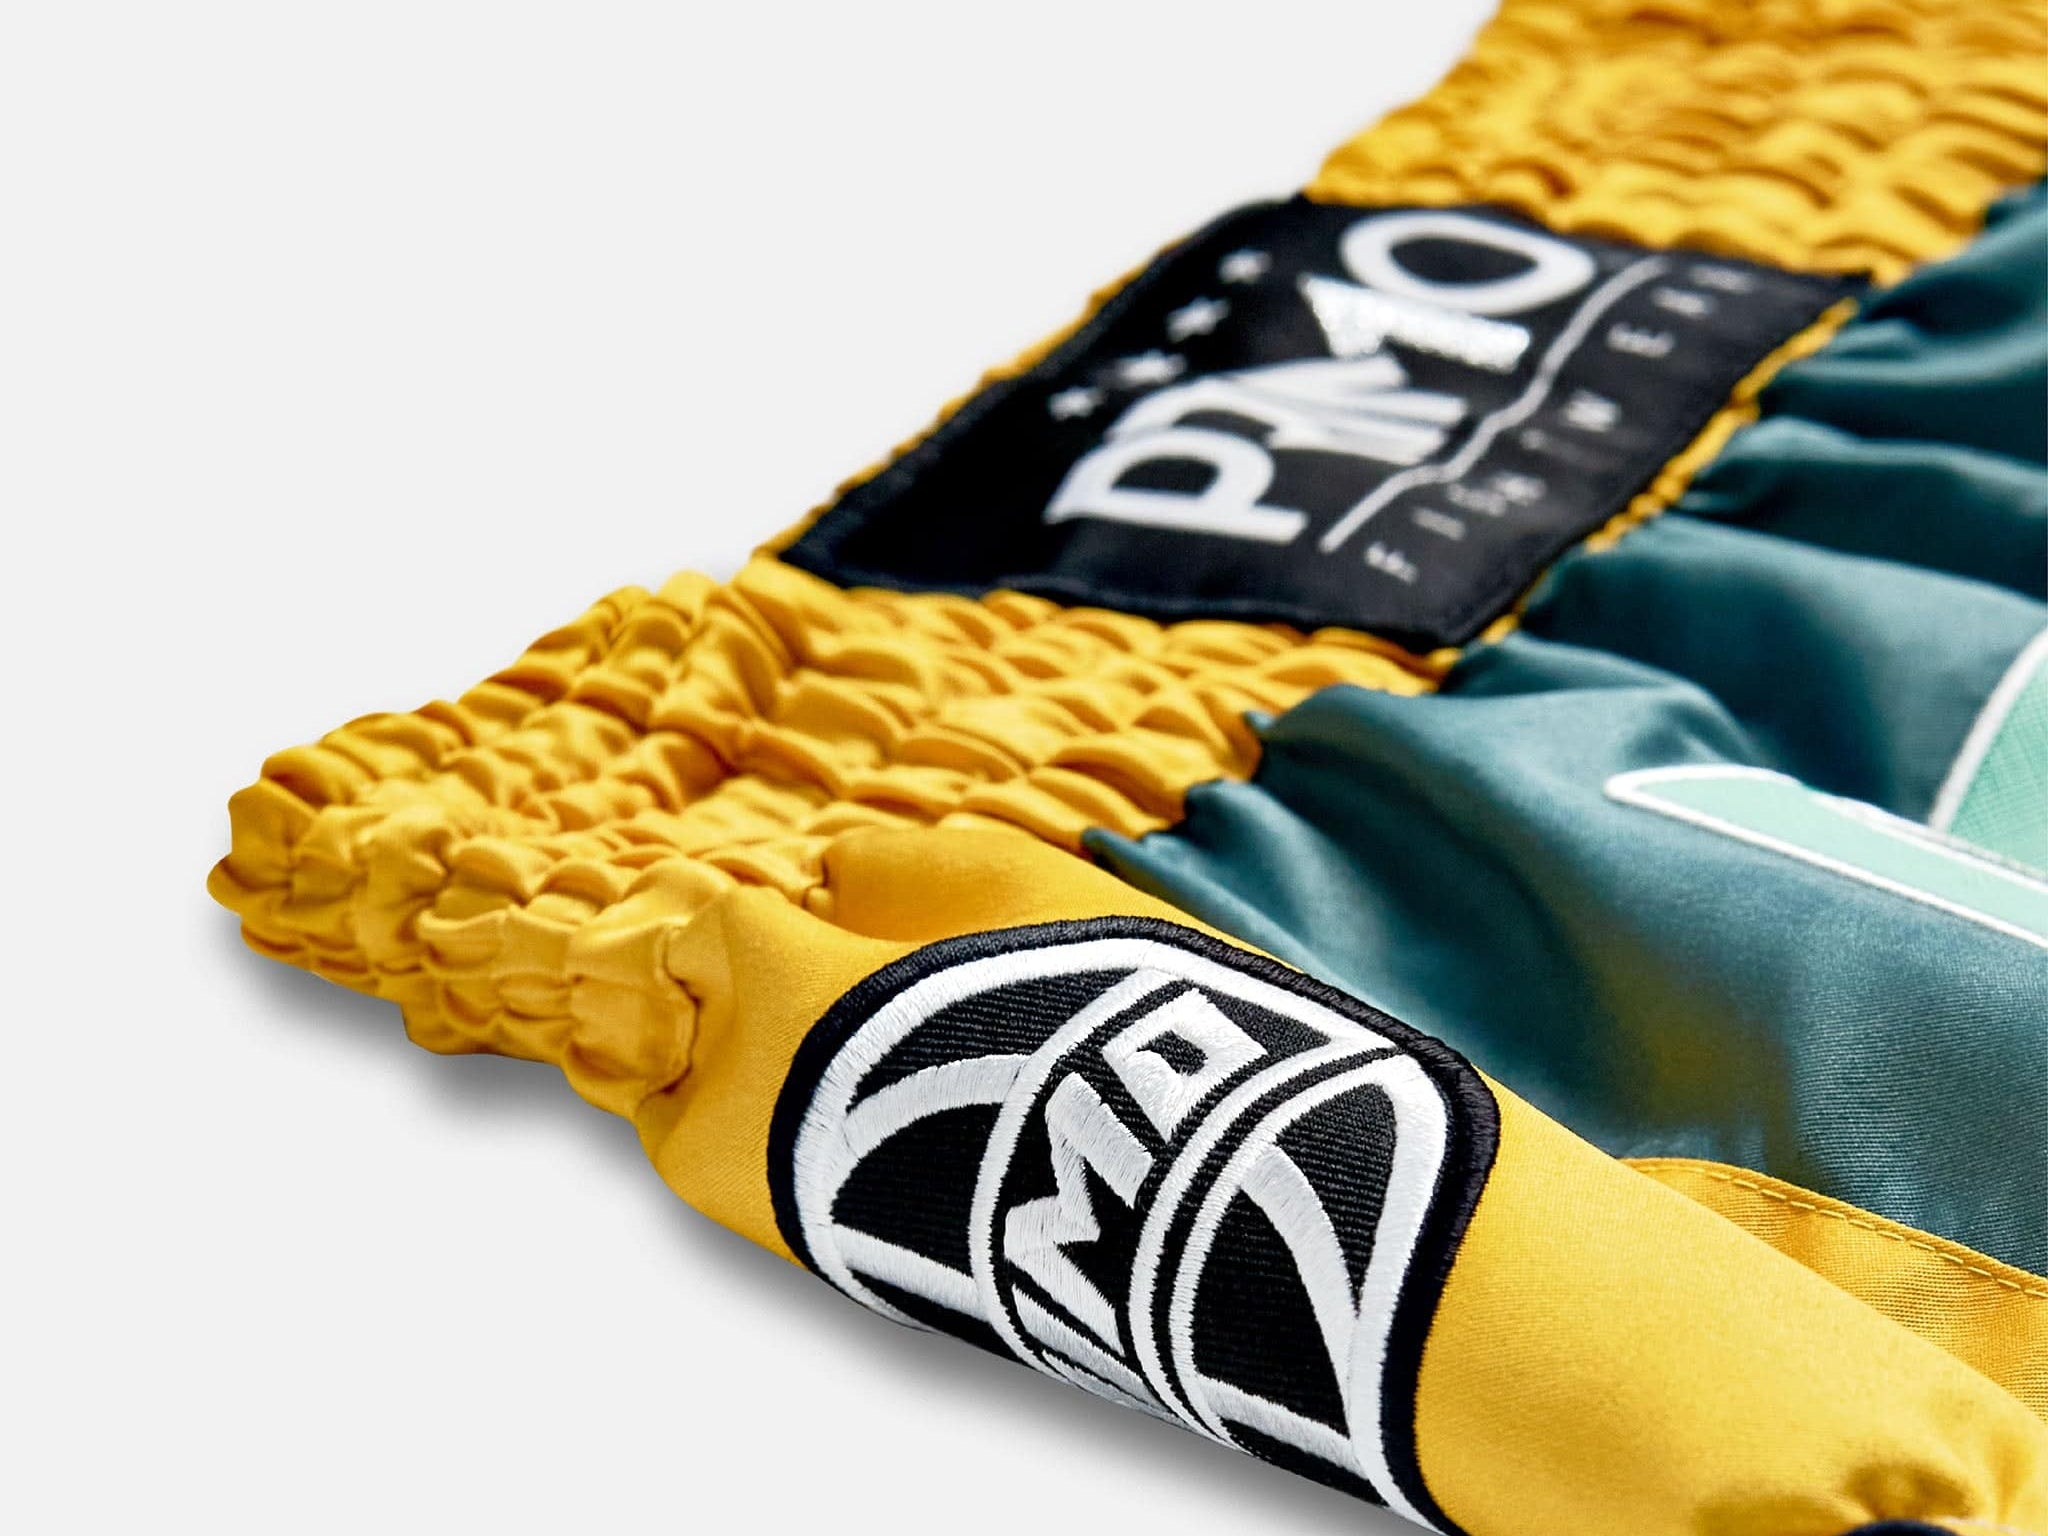 Primo Fight Wear Official Muay Thai Shorts - Trinity Series -  Teal